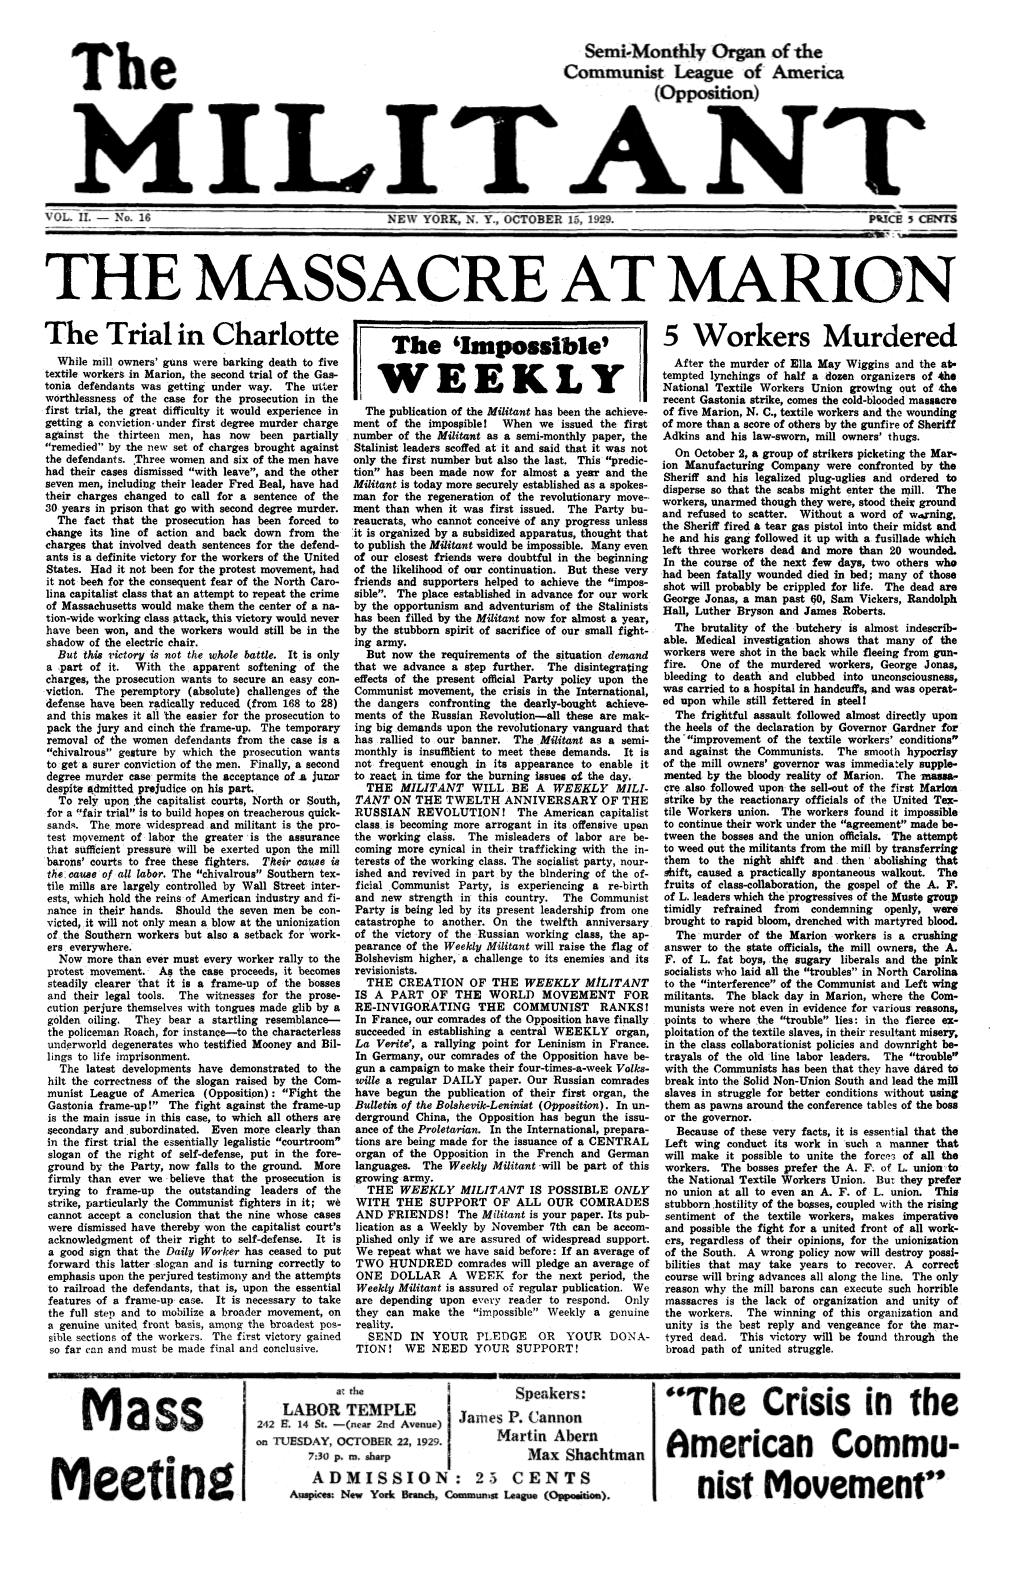 The Massacre at Marion